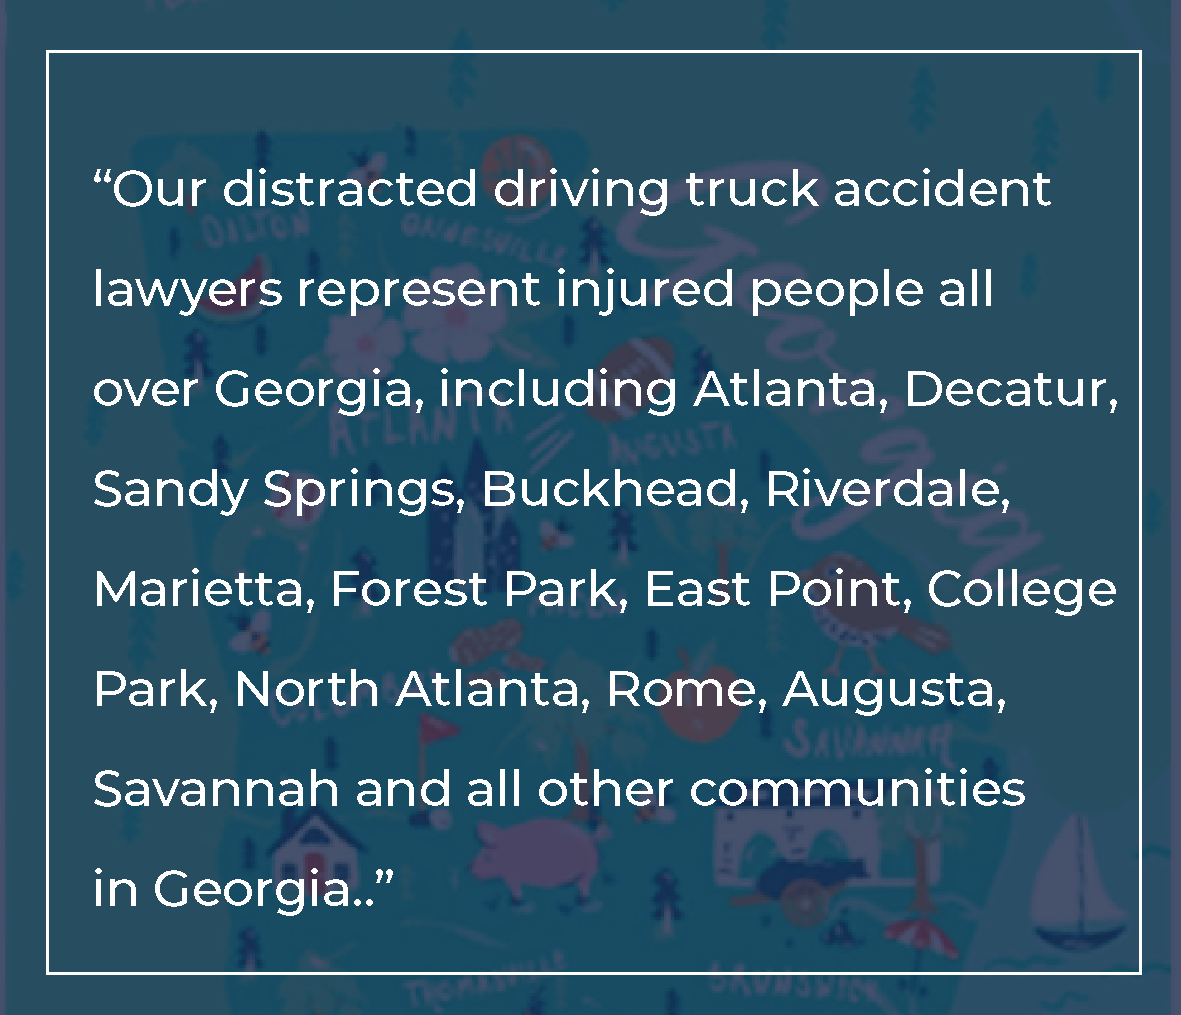 quote about distracted truck accident lawyers